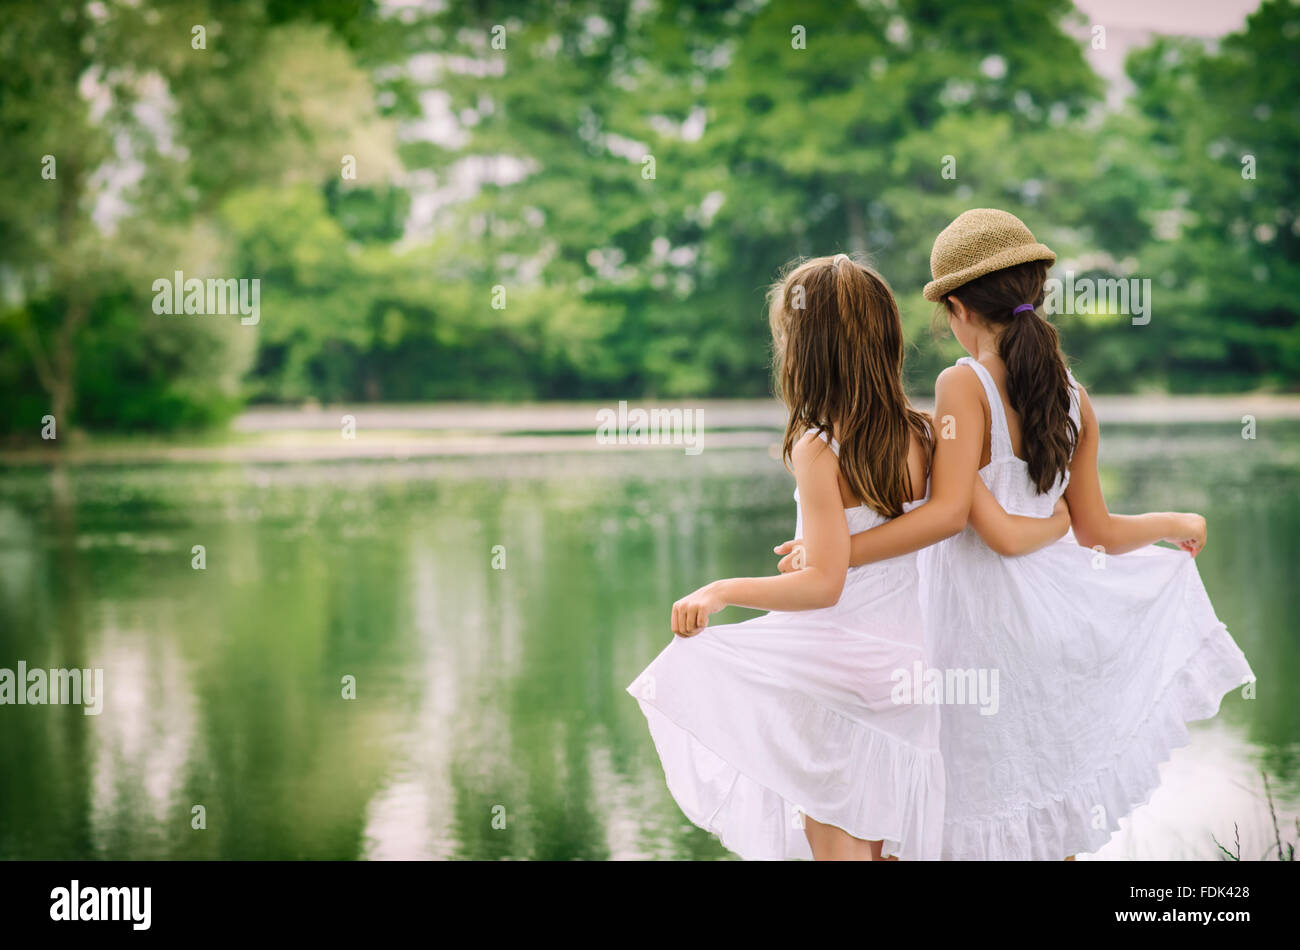 Rear view of two girls standing by a river embracing Stock Photo